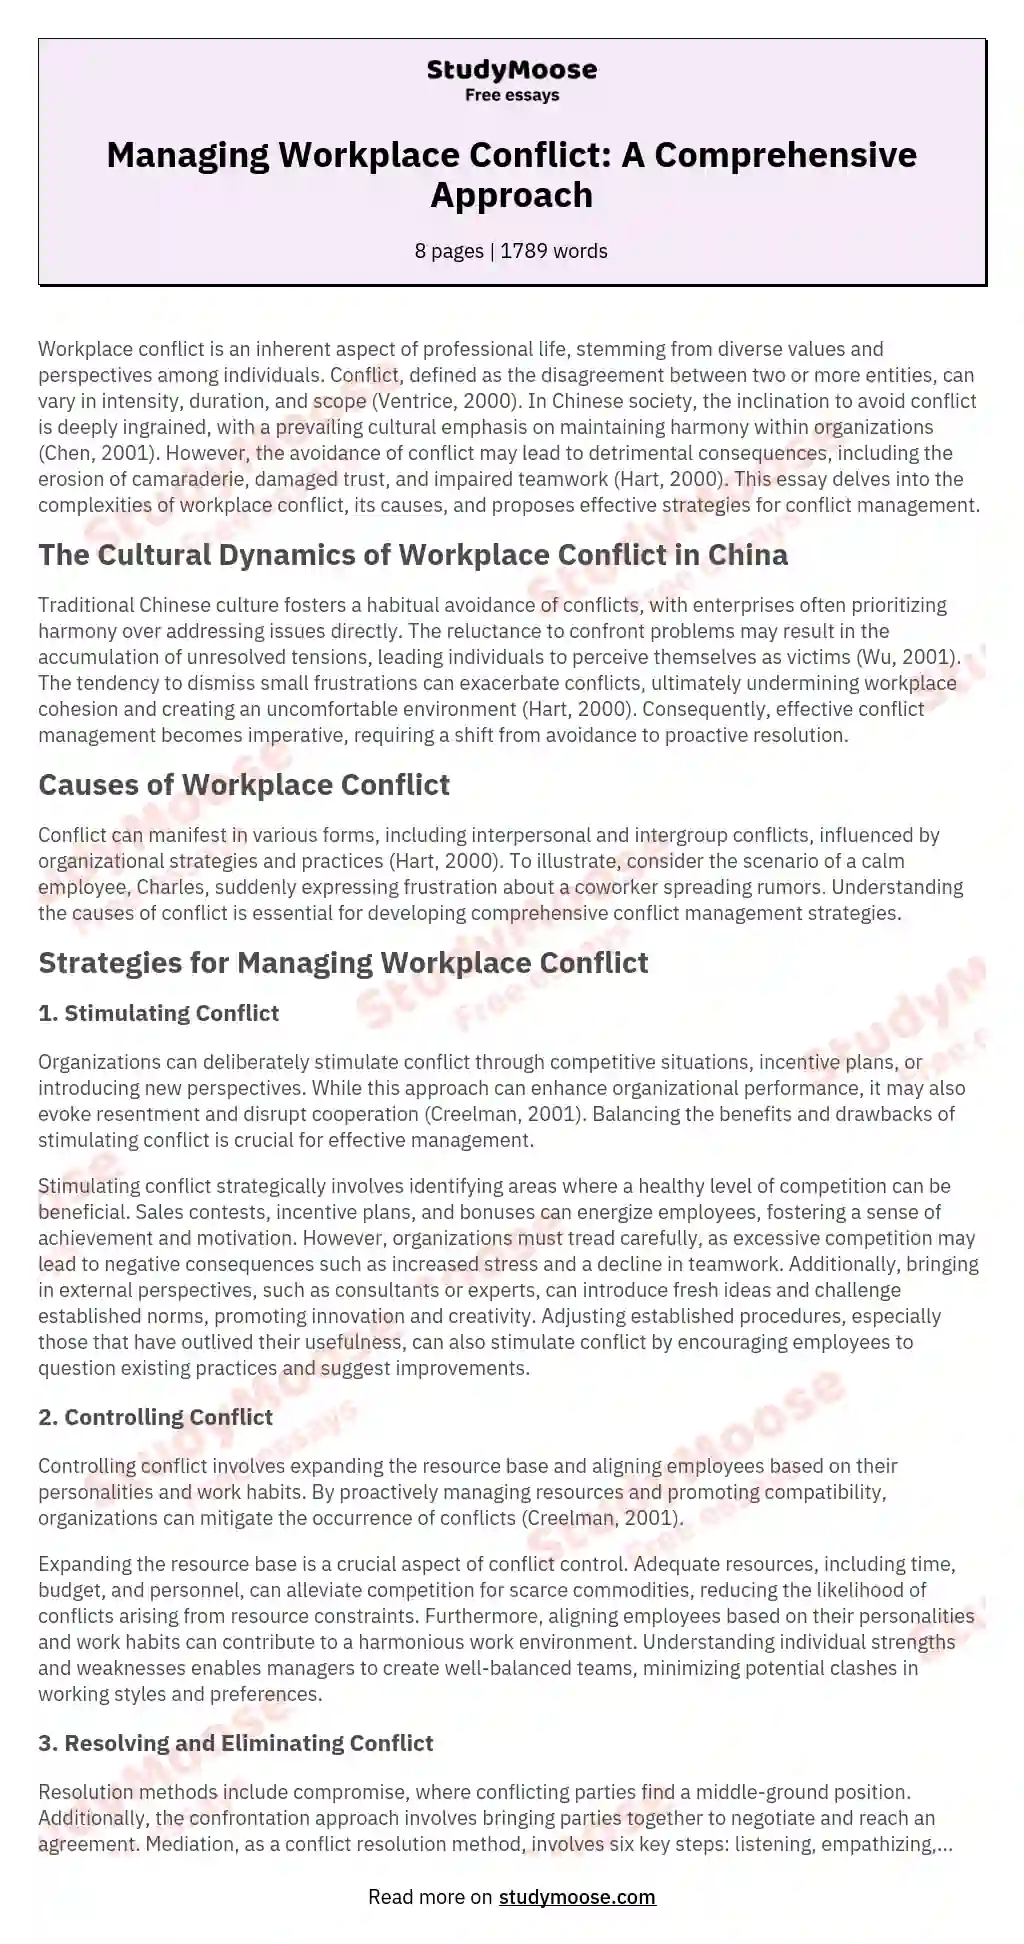 Managing Workplace Conflict: A Comprehensive Approach essay